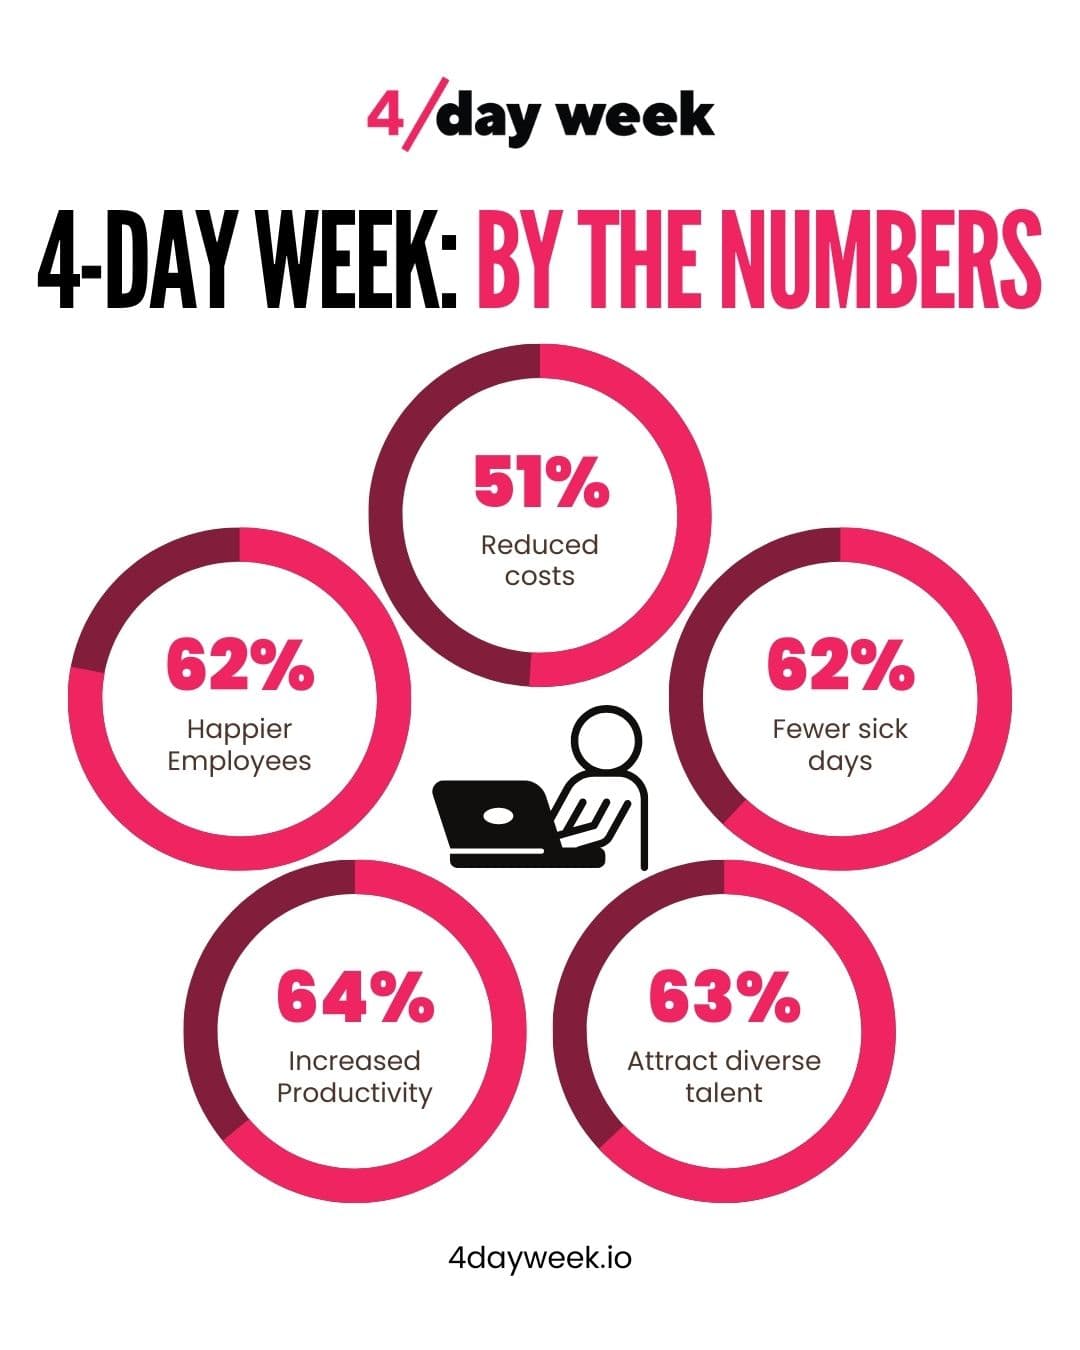 4-Day Workweek: By the Numbers
